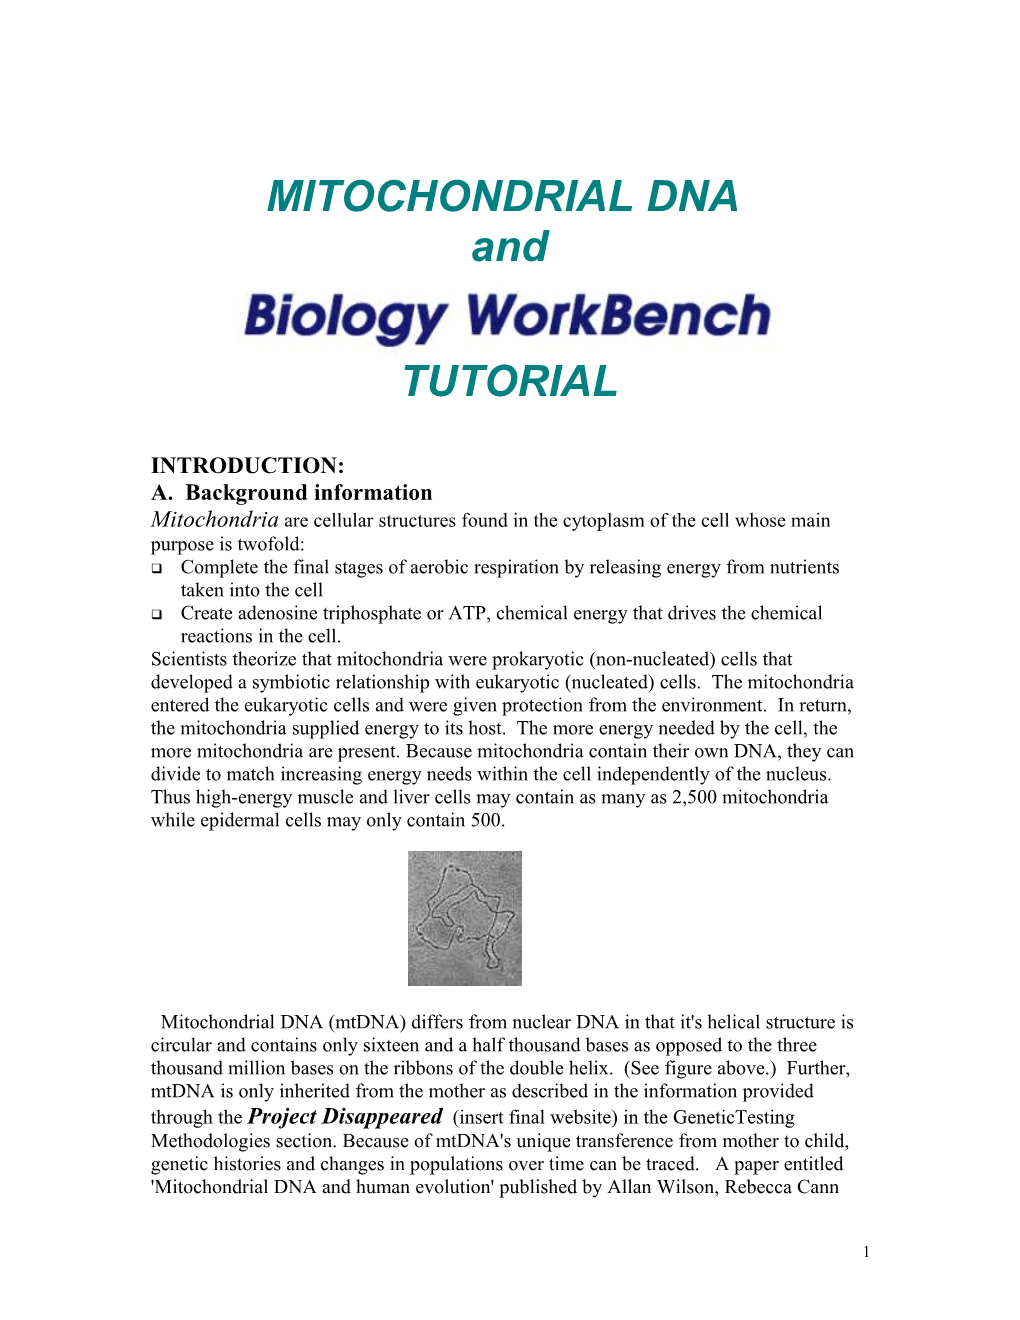 Mtdna and BIOLOGY WORKBENCH